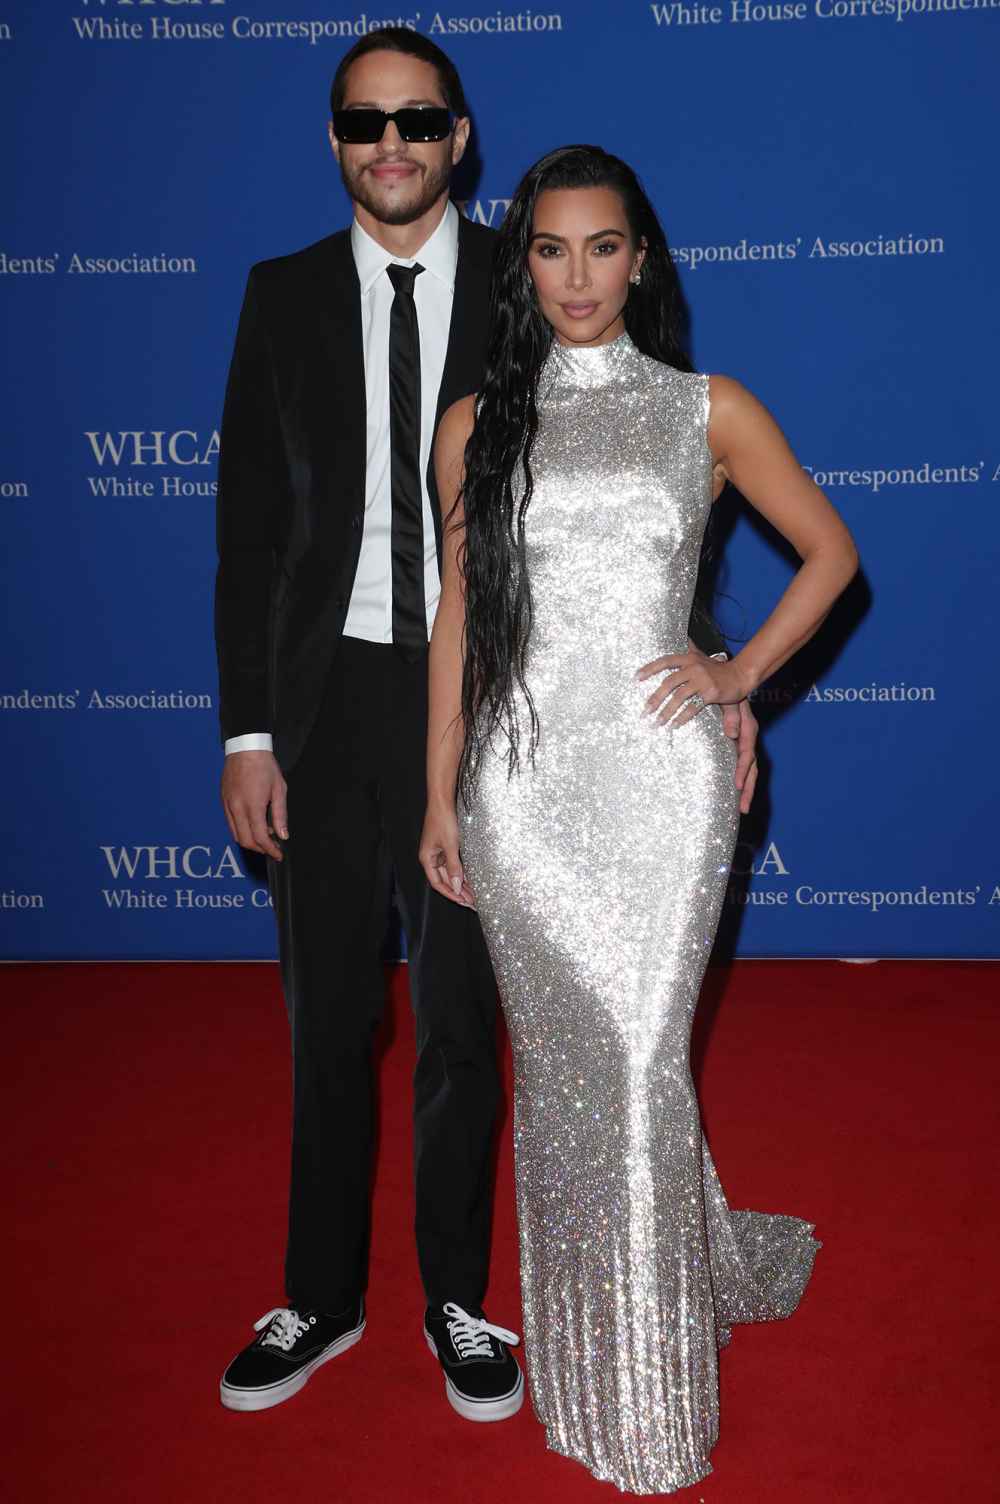 Pete Davidson in suit and sneakers, Kim Kardashian in silver gown